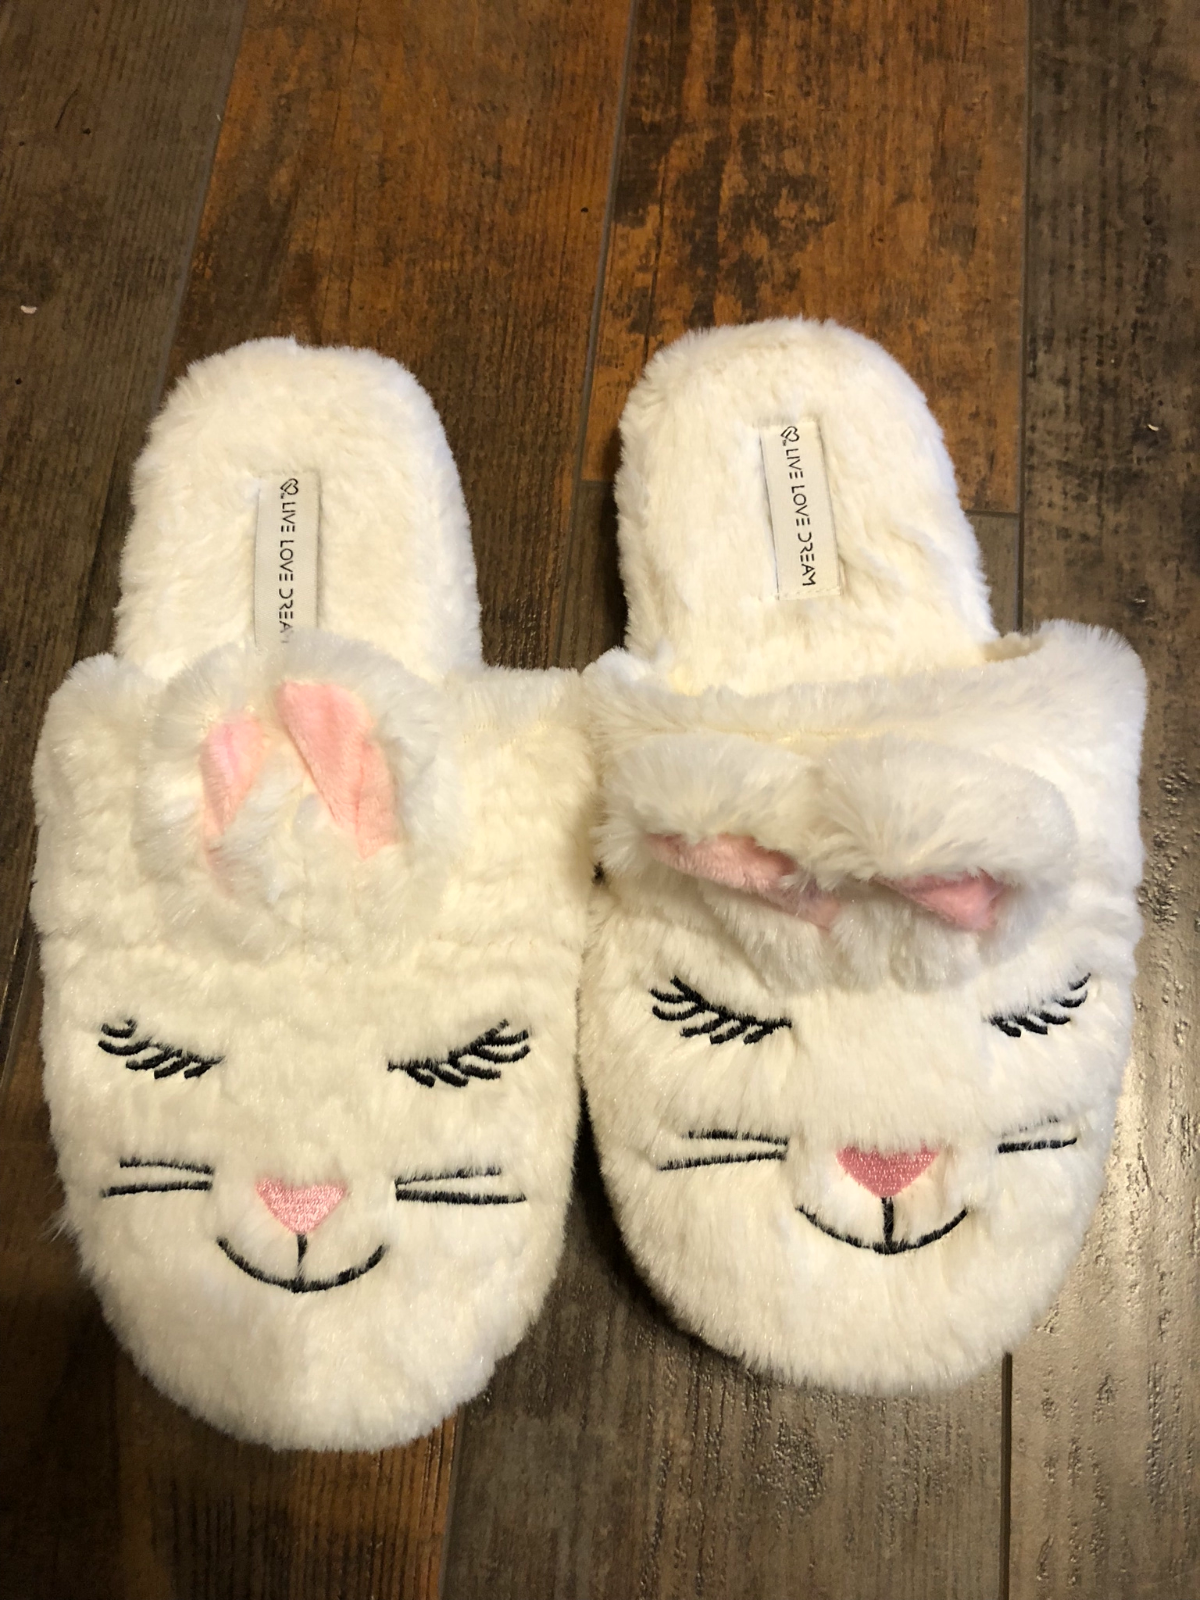 WOMENS lowest price NWOT AEROPOSTALE WHITE 8 favorite SIZE BUNNY SLIPPERS